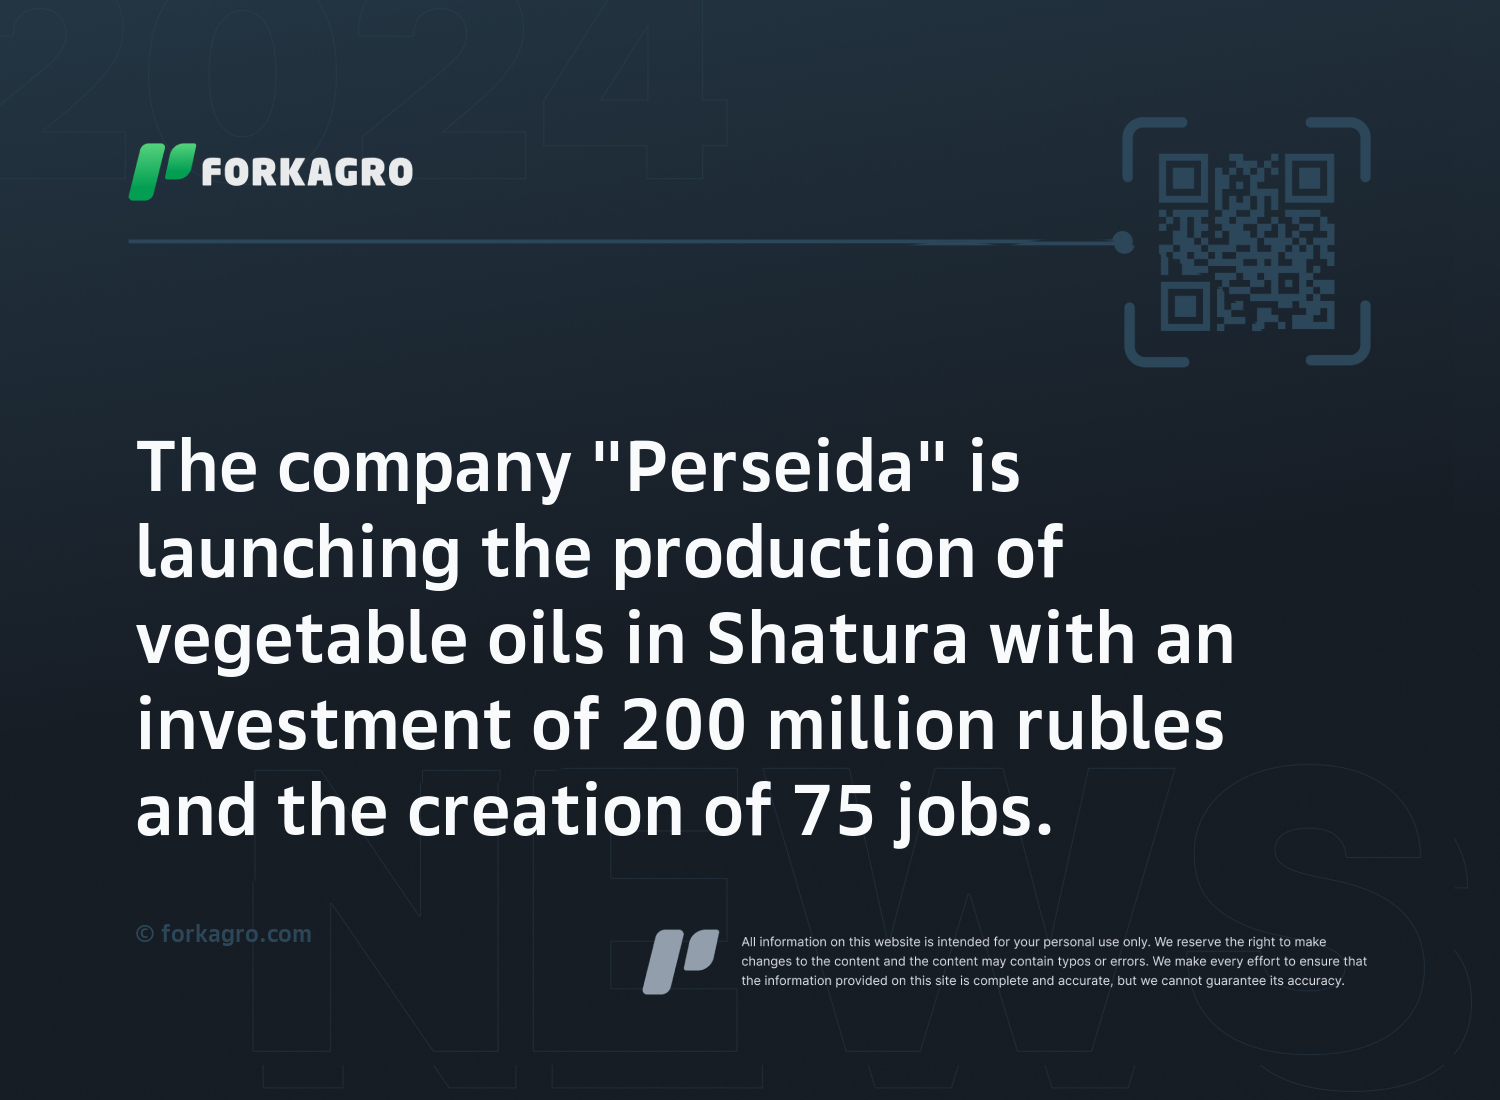 The company "Perseida" is launching the production of vegetable oils in Shatura with an investment of 200 million rubles and the creation of 75 jobs.